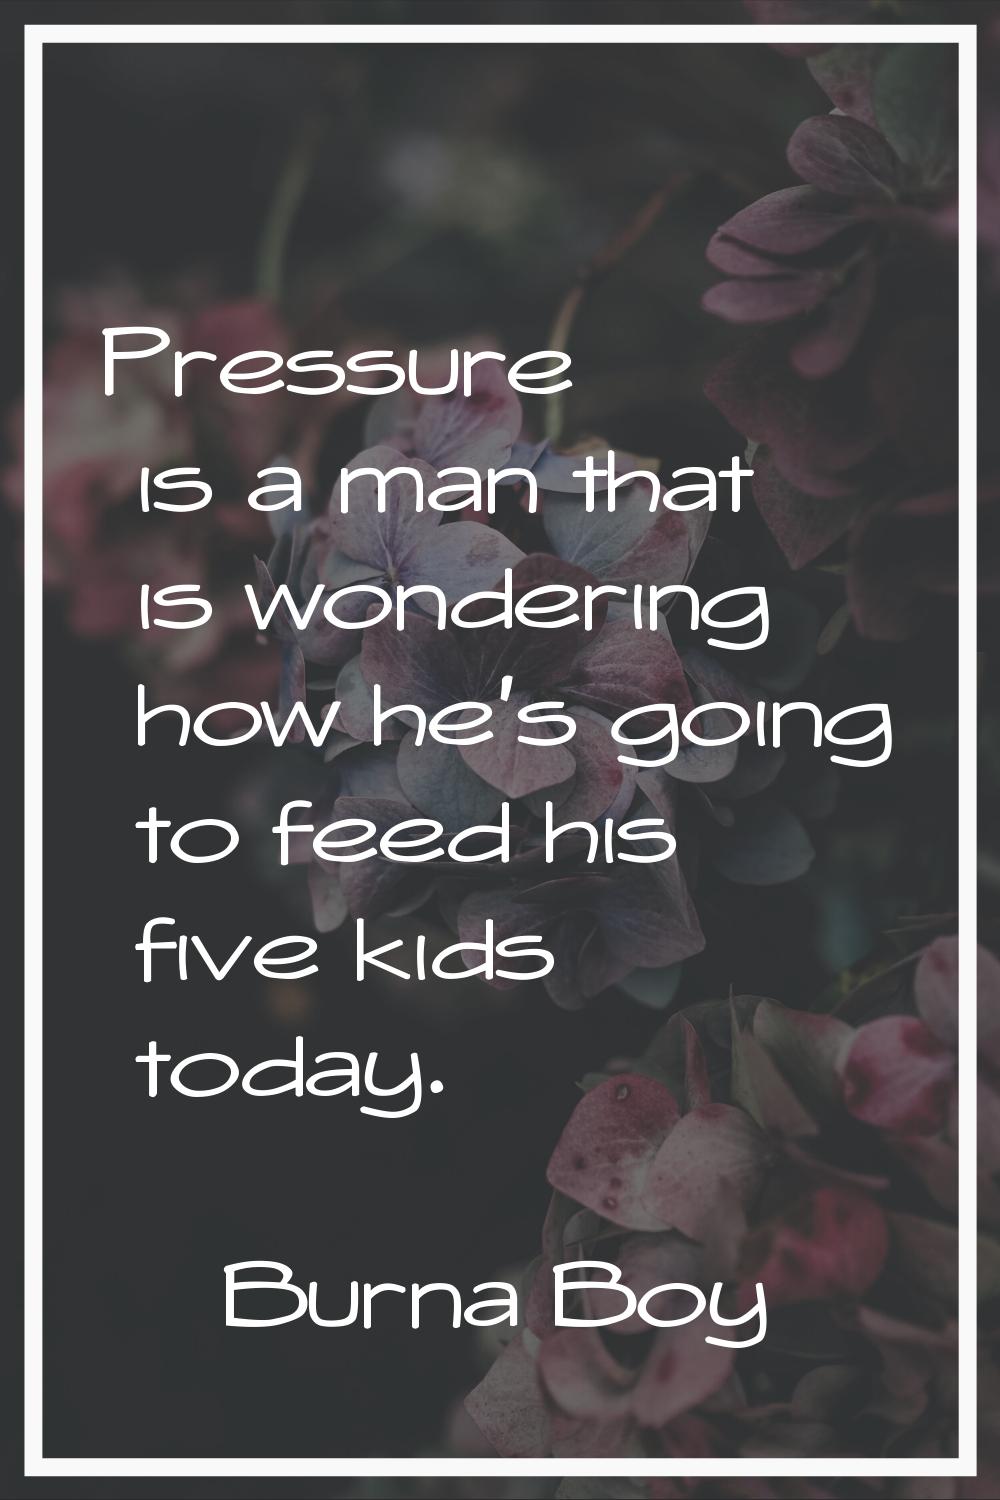 Pressure is a man that is wondering how he's going to feed his five kids today.